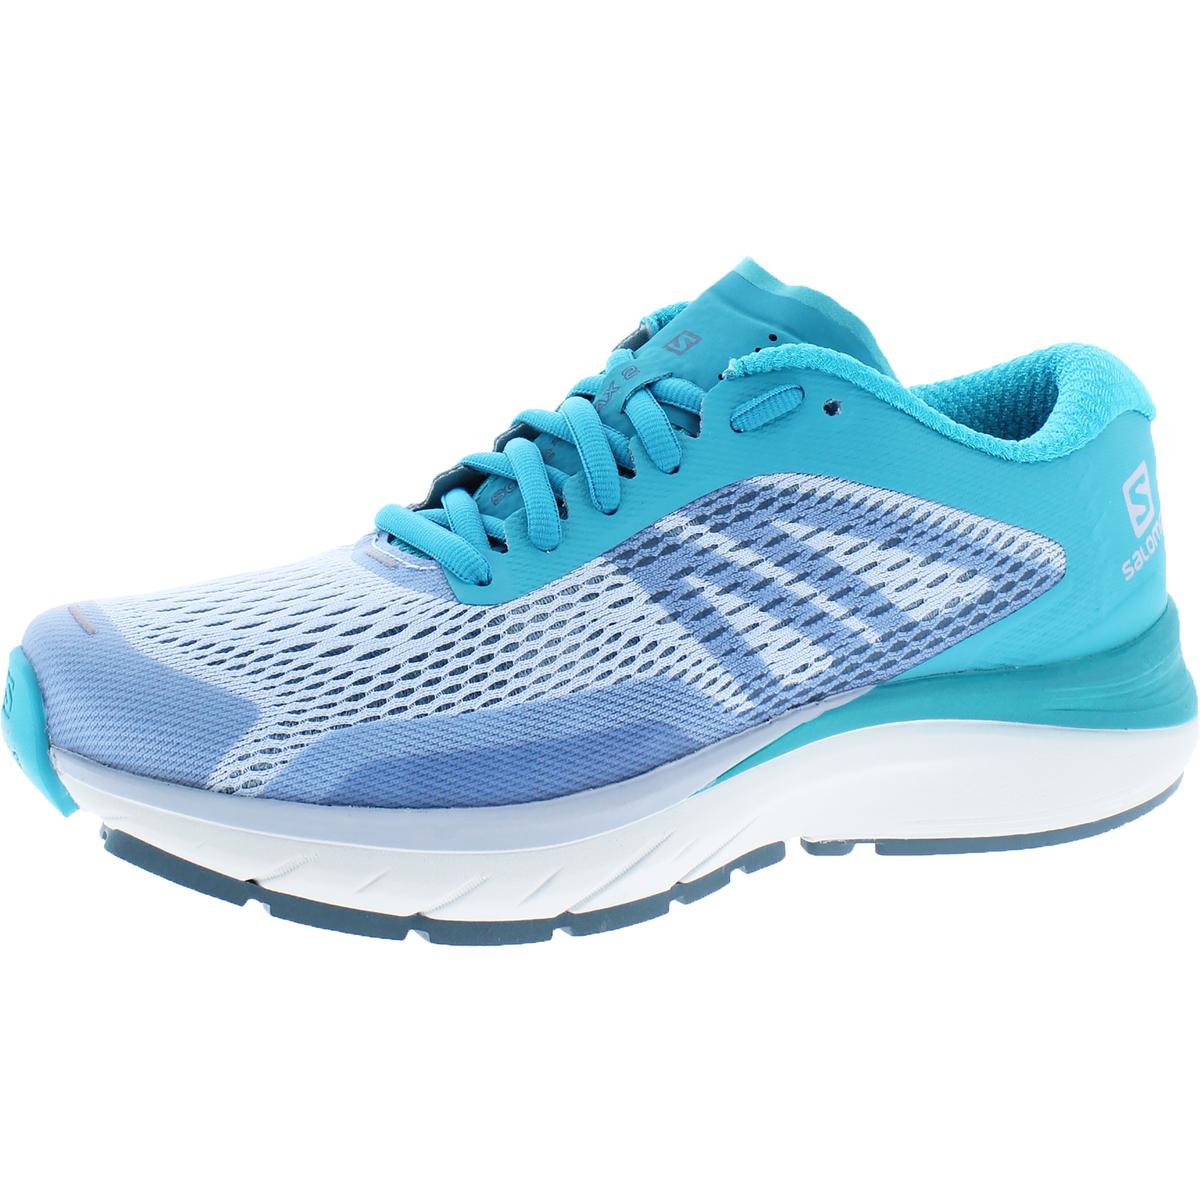 Sonic Ra Max 2 Womens Knit Sport Running Shoes